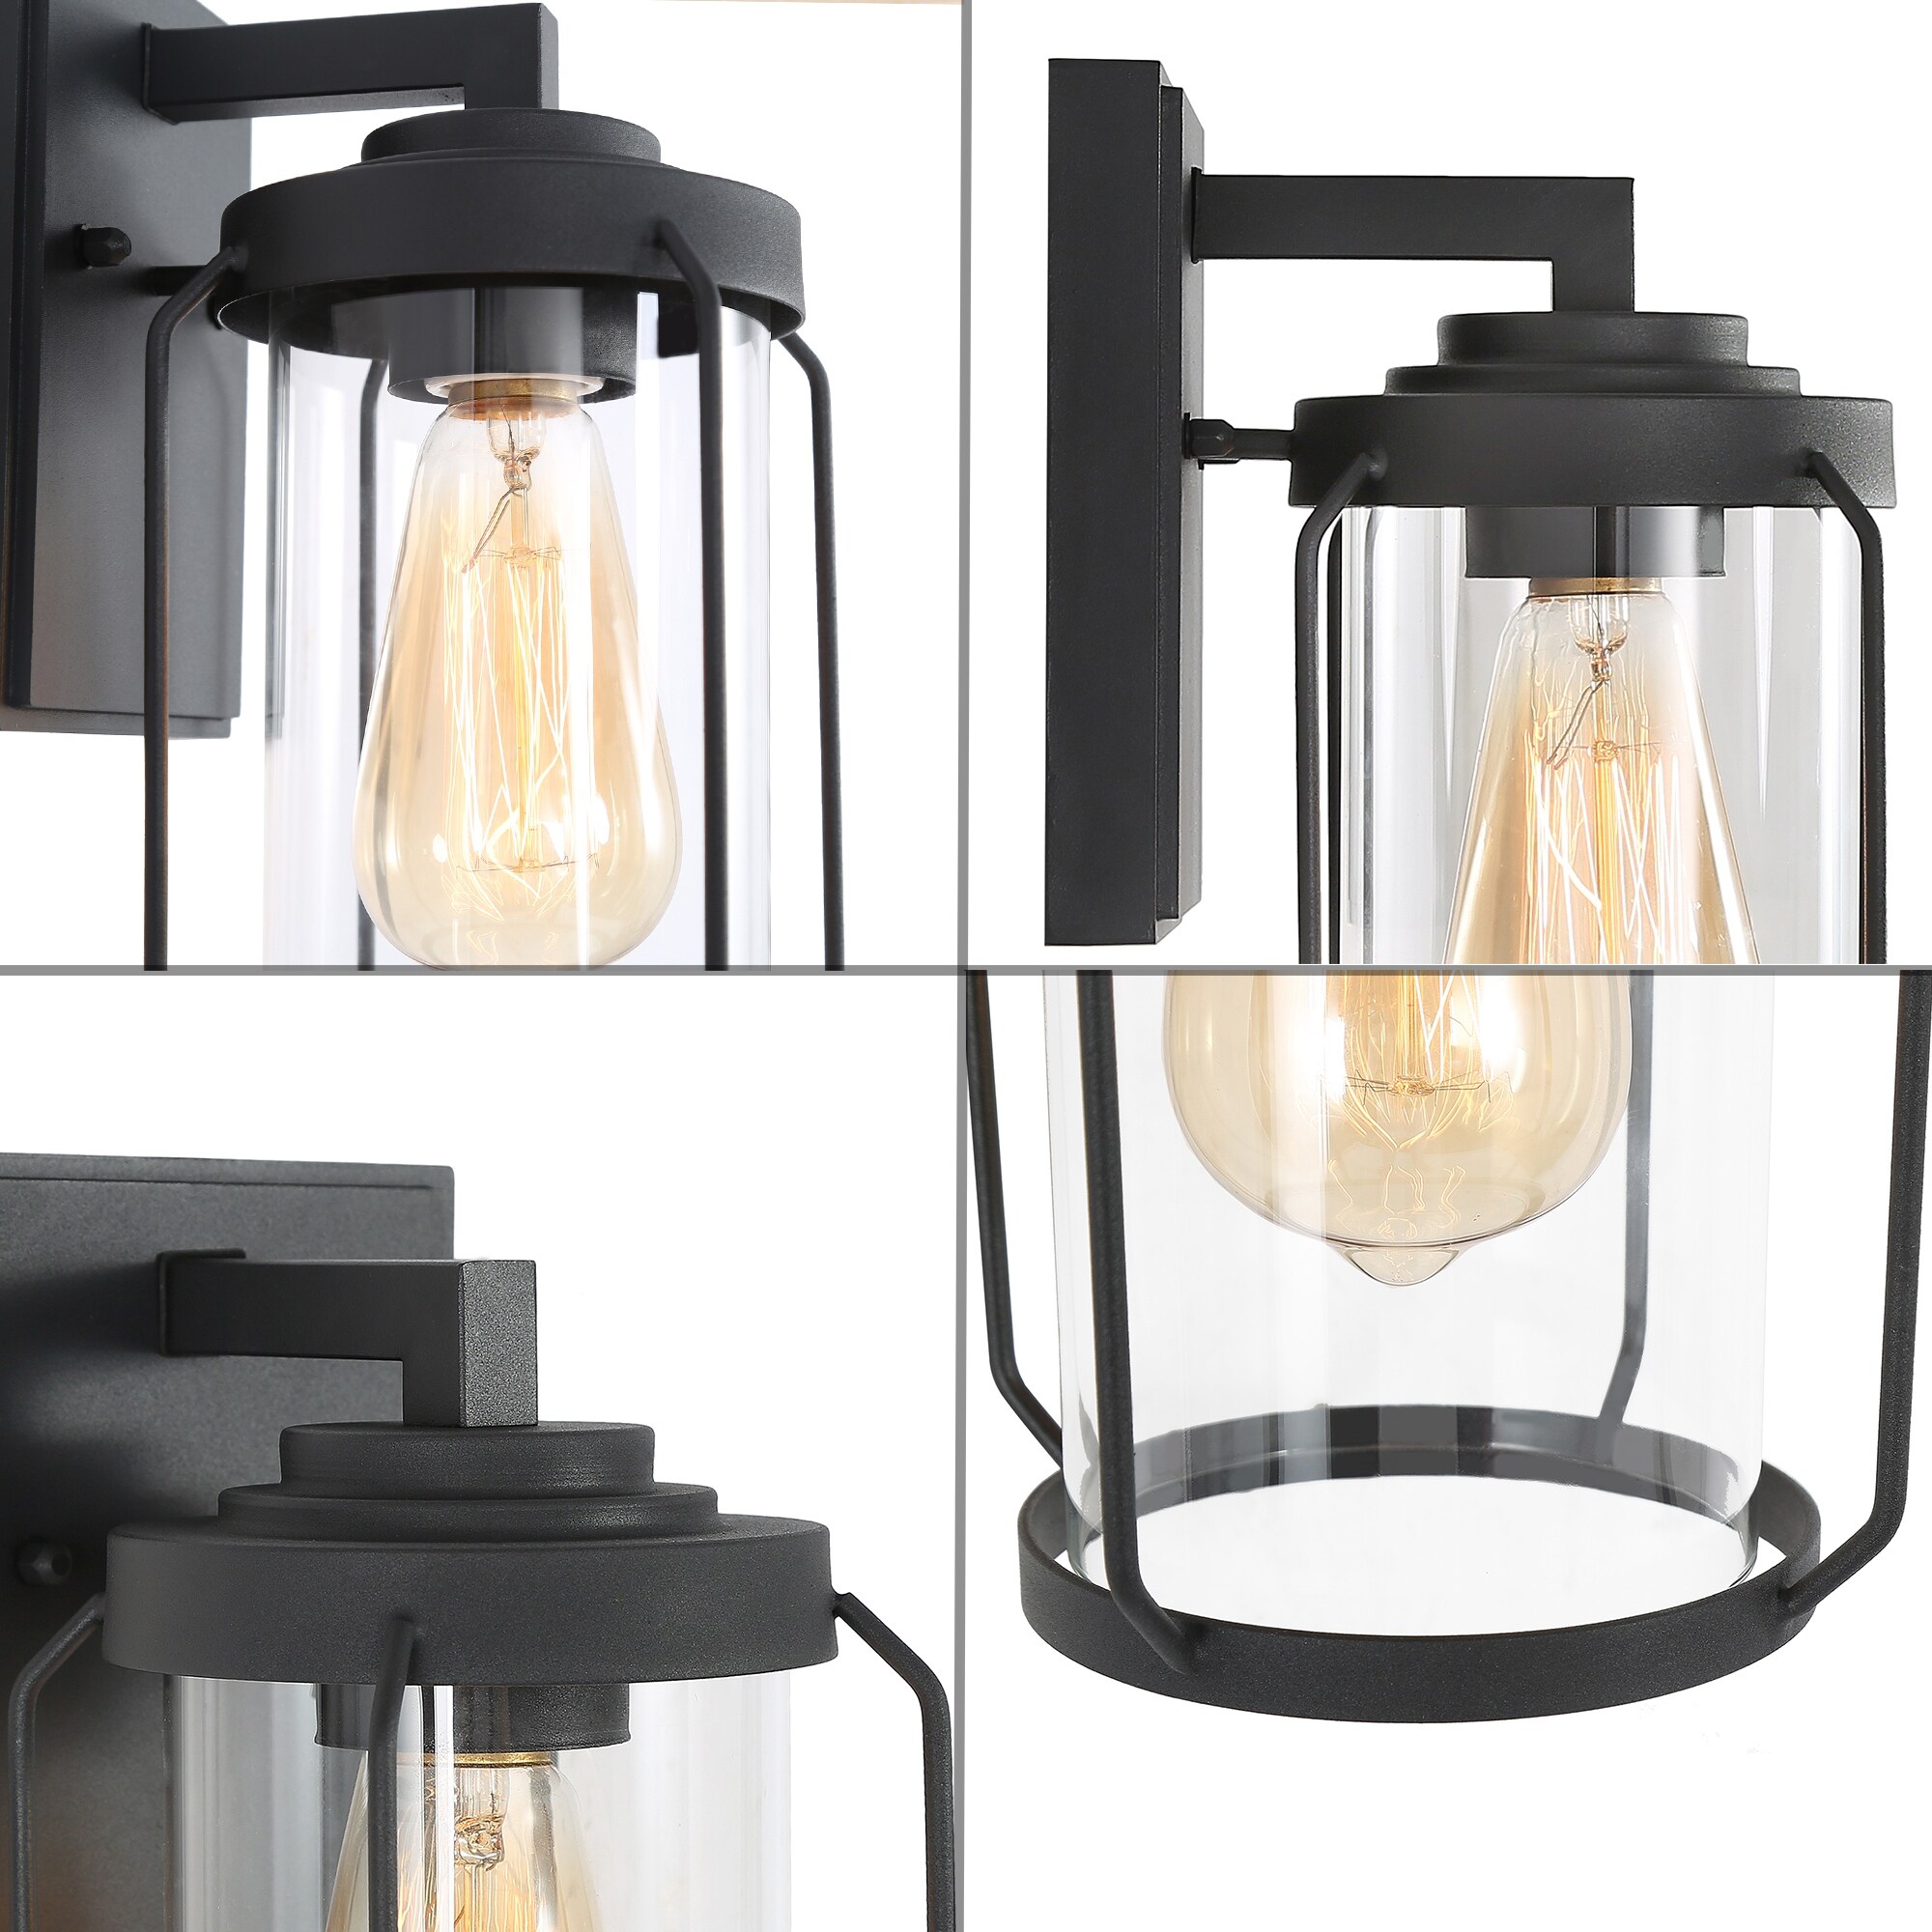 https://ak1.ostkcdn.com/images/products/is/images/direct/280aa2d6d75860d1c5b27c5e6ee705d4e05710d2/Black-2-Pack-Outdoor-Wall-Sconce-Glass-1-light-Wall-Lantern-Exterior-Lighting.jpg